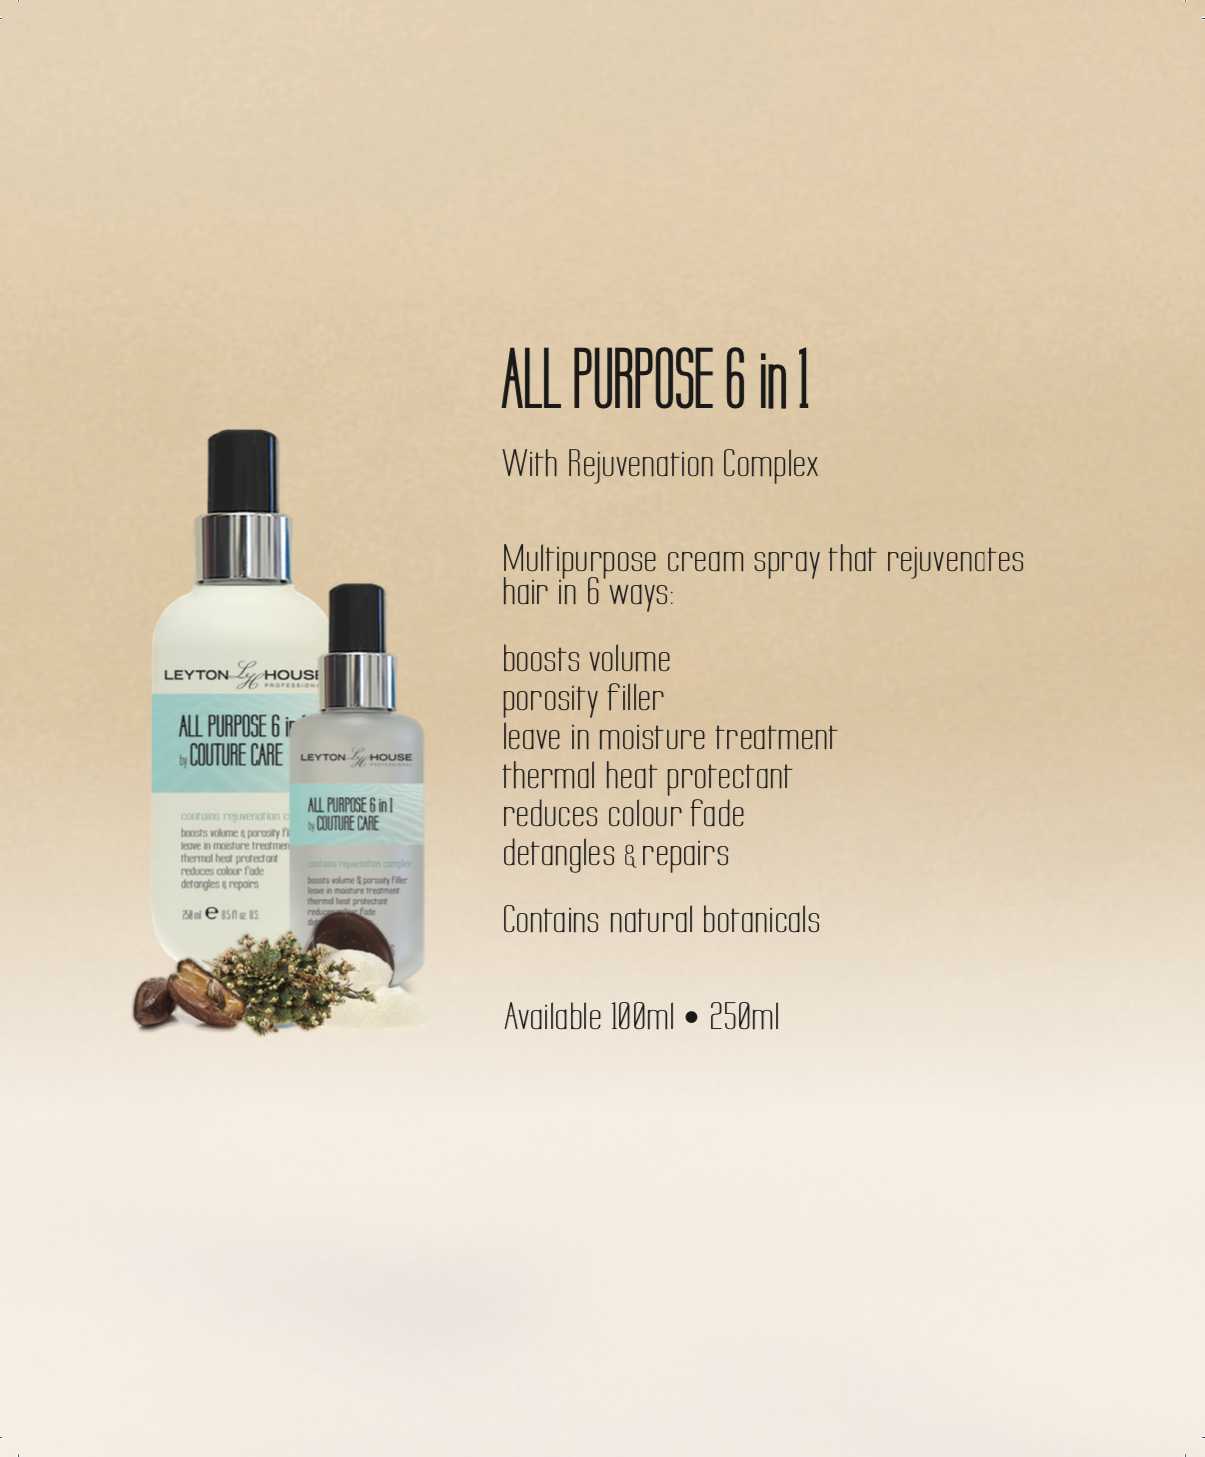 ALL PURPOSE 6 in 1 by COUTURE CARE (Leyton House Professional)